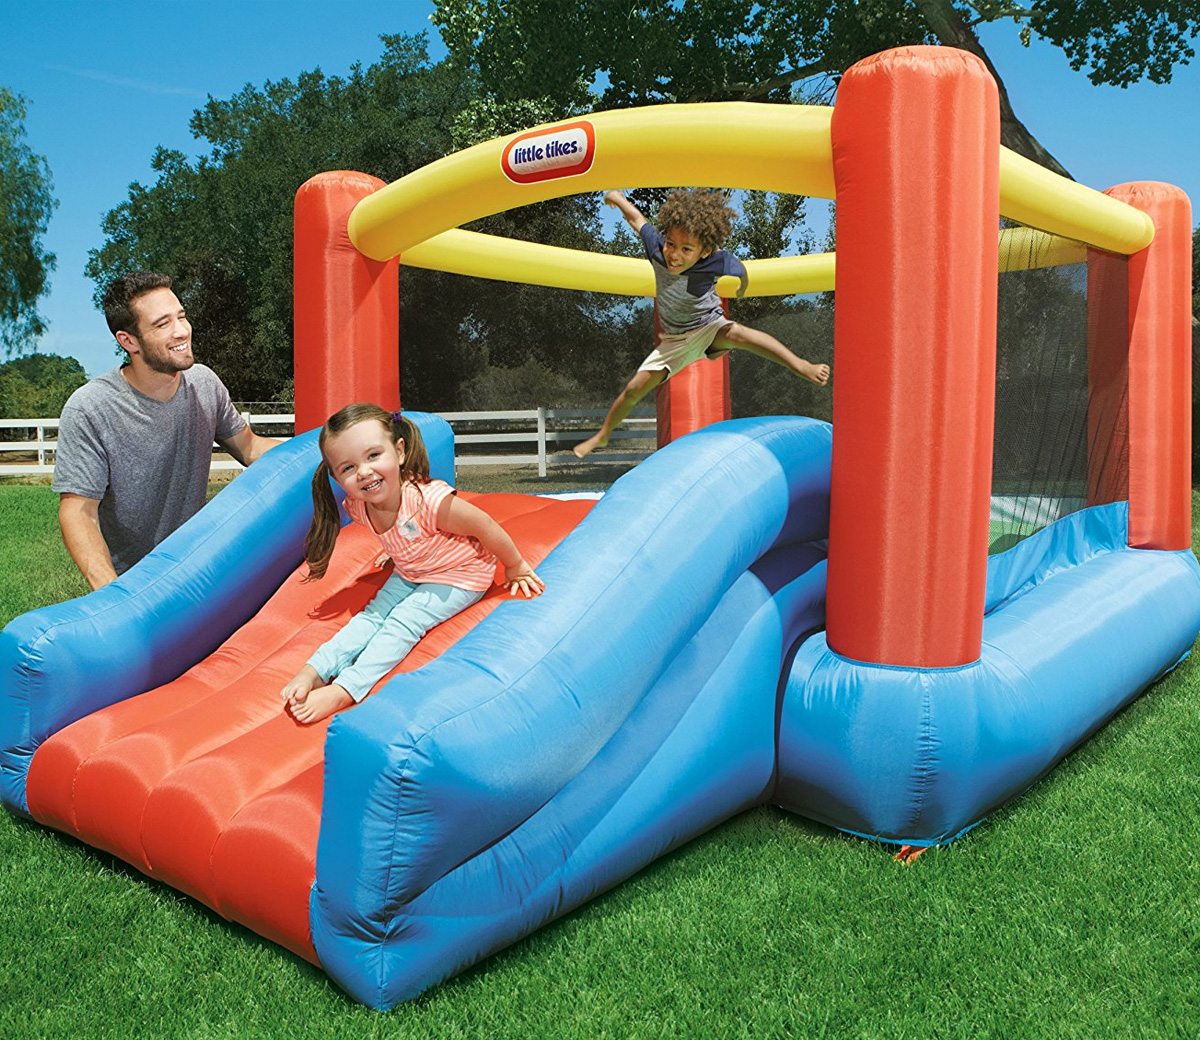 jump and slide bouncer